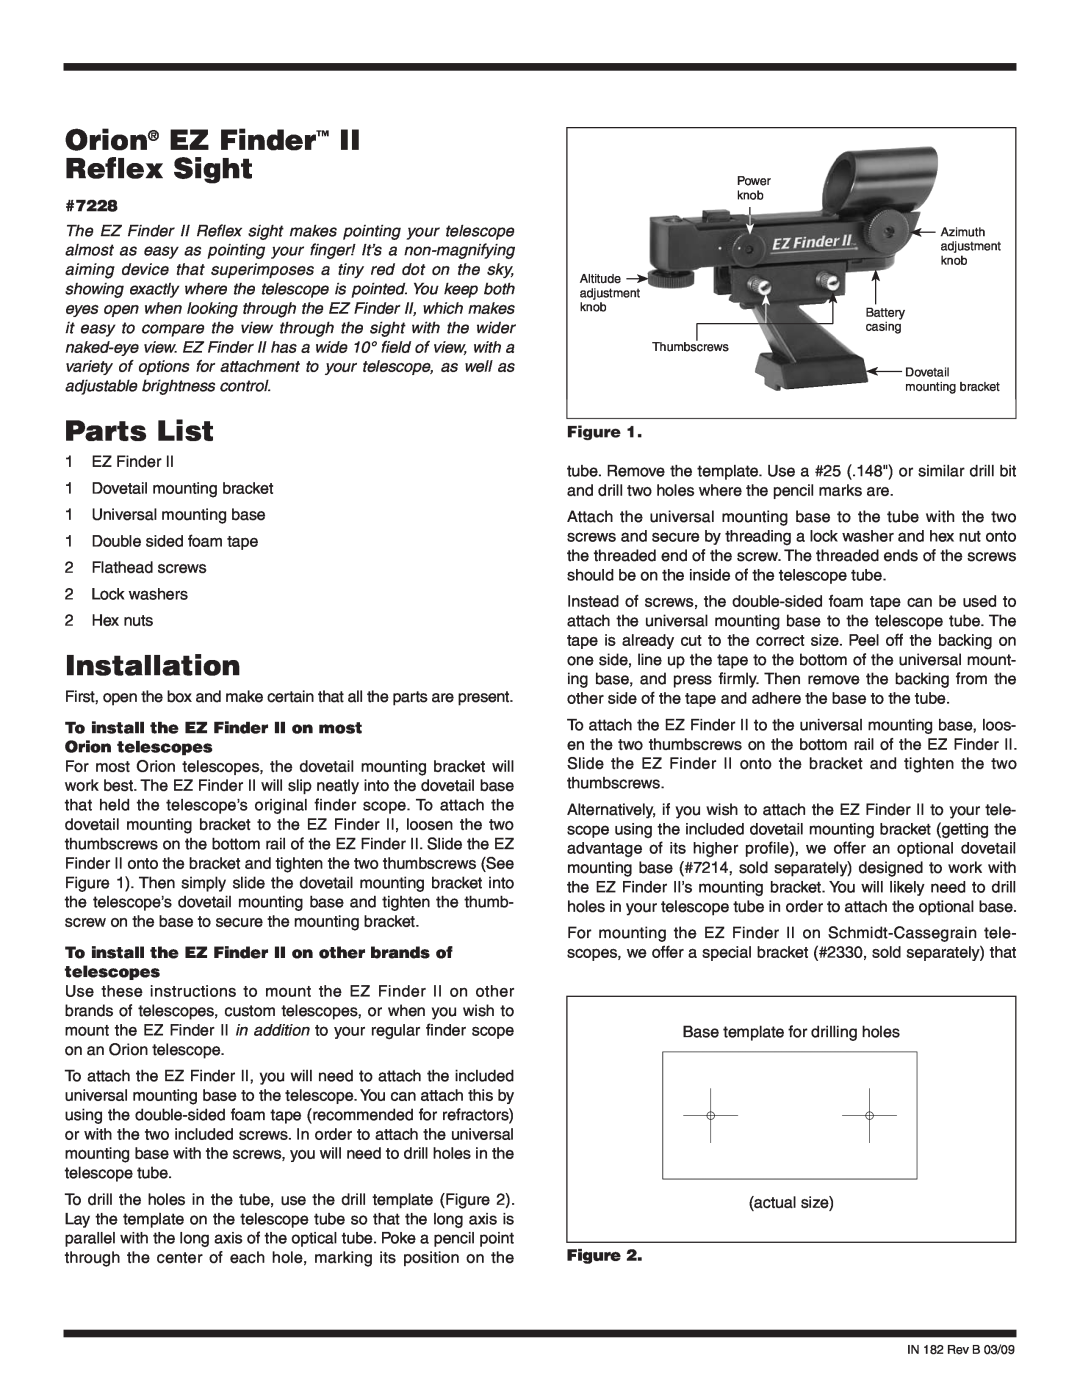 Orion manual Orion EZ Finder Reflex Sight, Parts List, Installation, #7228, To install the EZ Finder II on most 